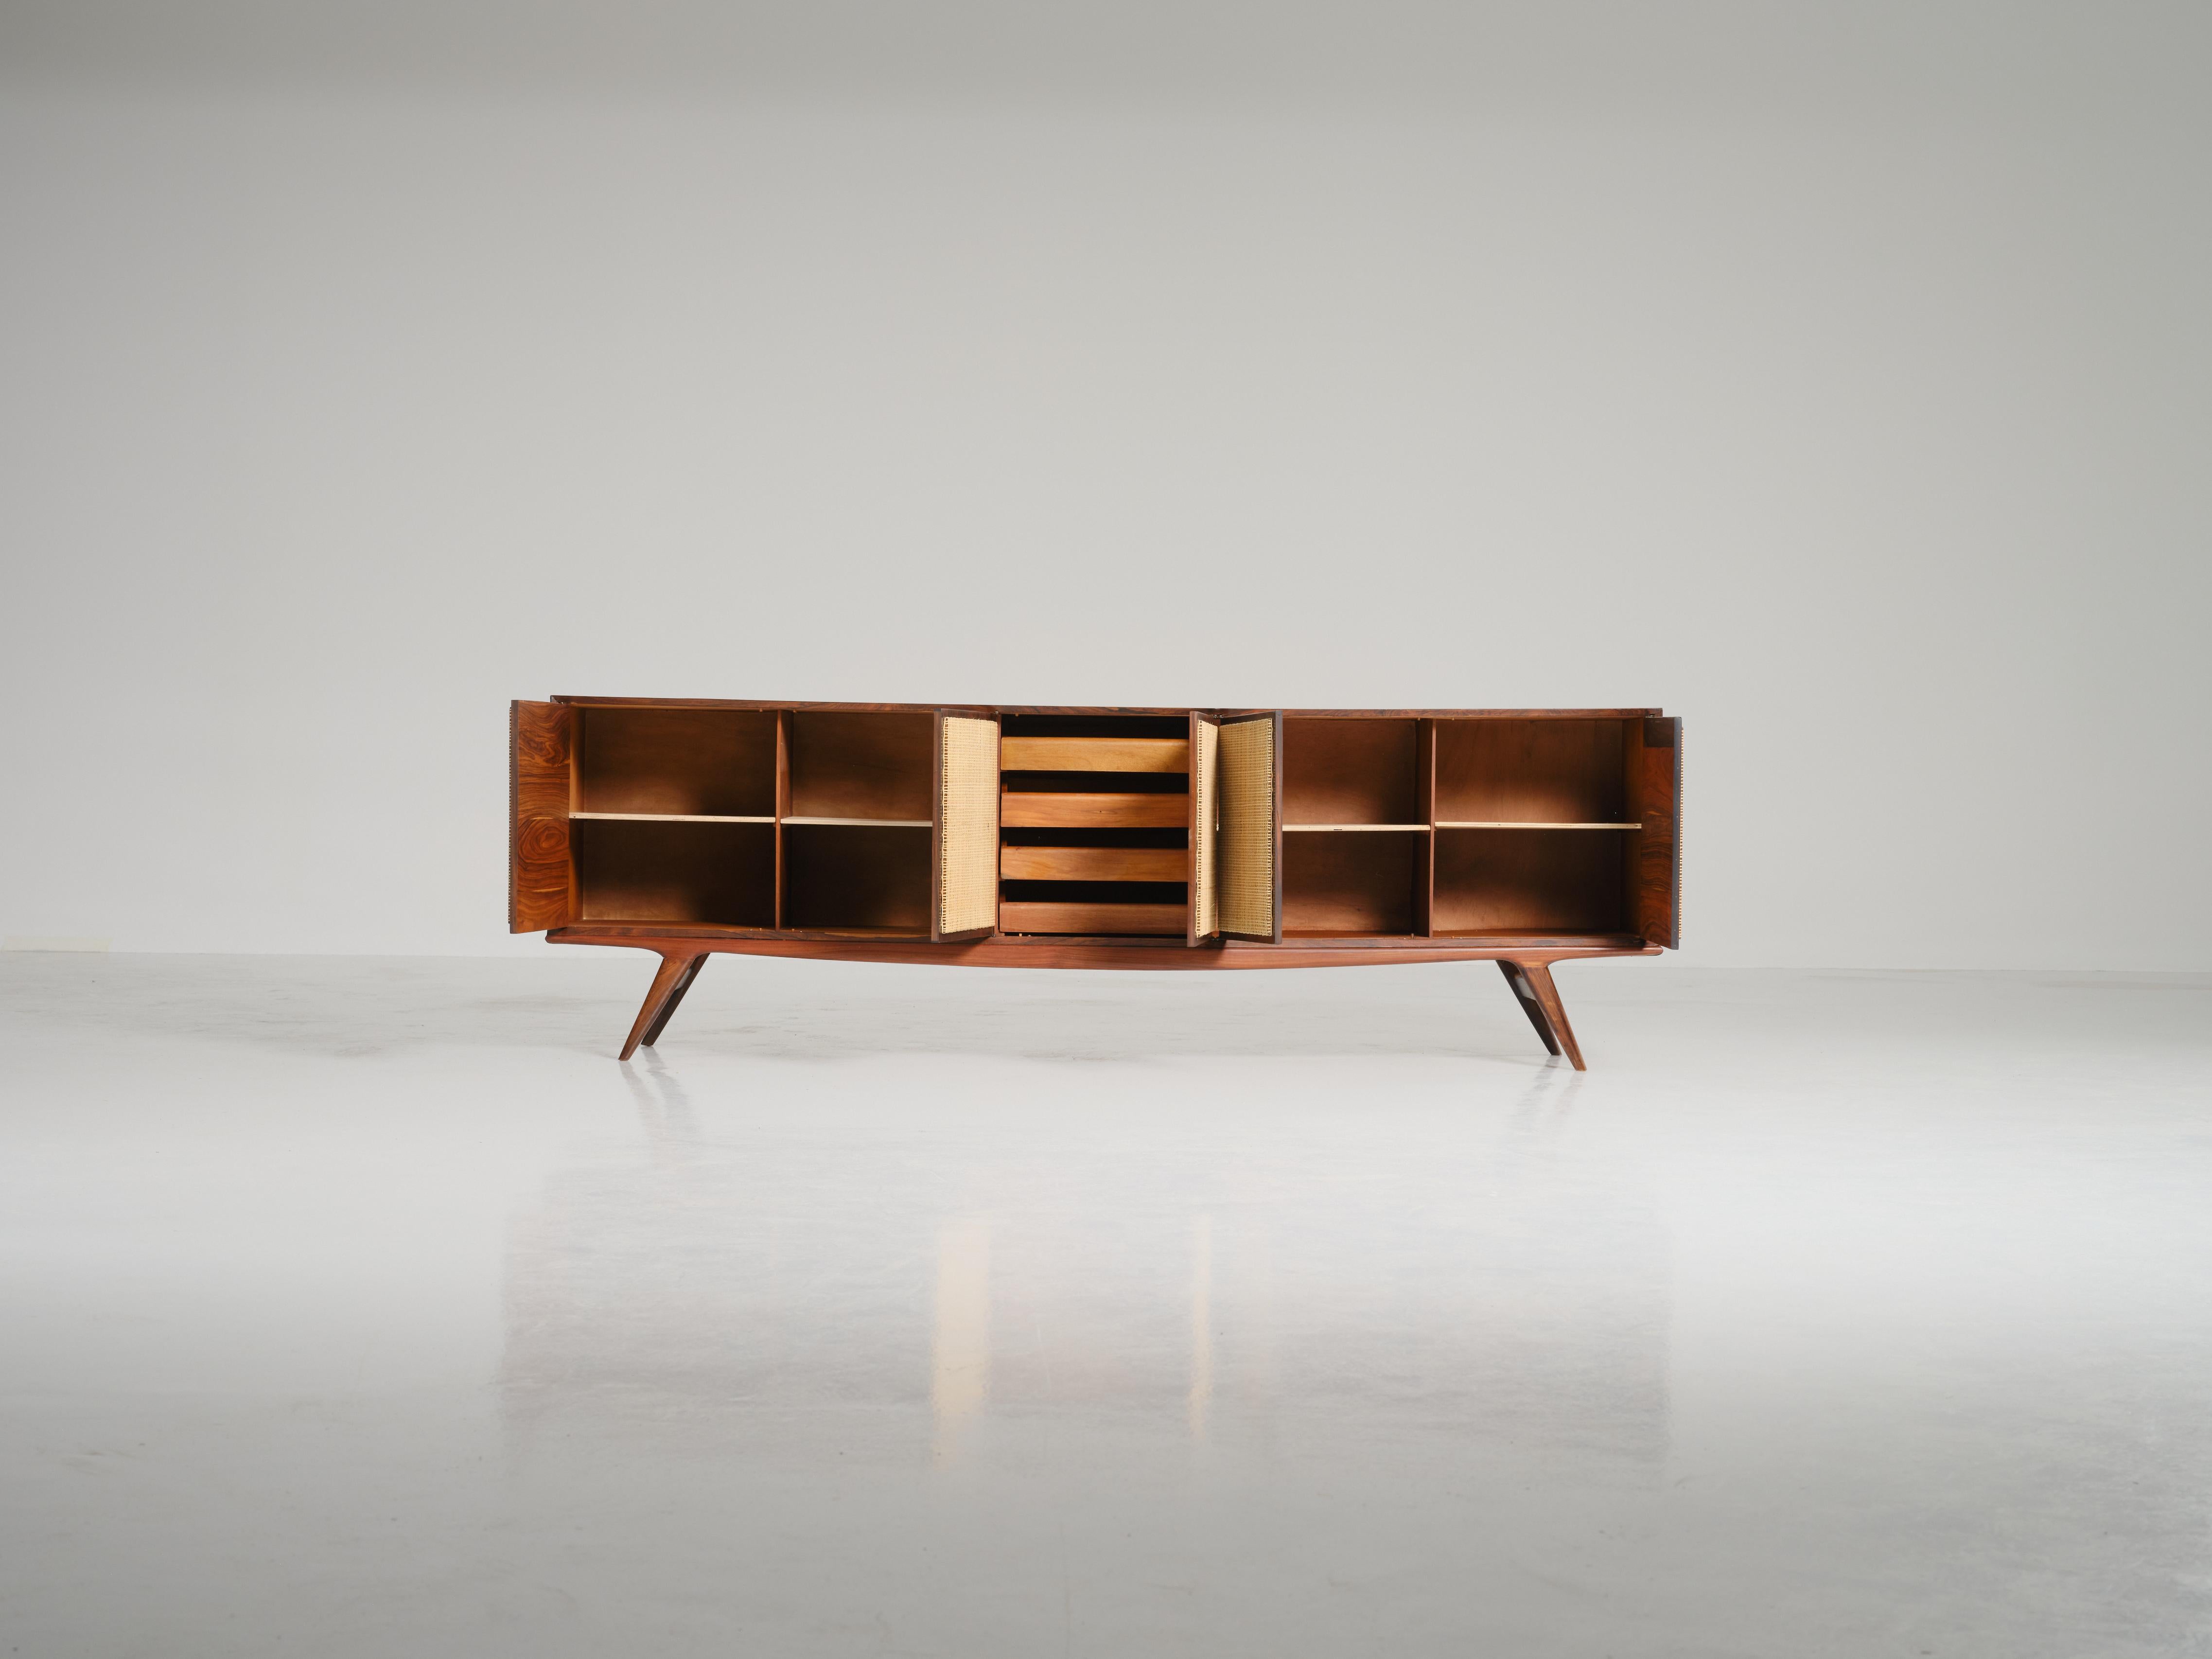 The 1950s sideboard, an attribution to Carlo Hauner stands as a testament to the visionary collaboration between Carlo Hauner (1927 — 1997) and Martin Eisler (1913 — 1977), primary designers for the iconic Brazilian furniture company Forma. Their